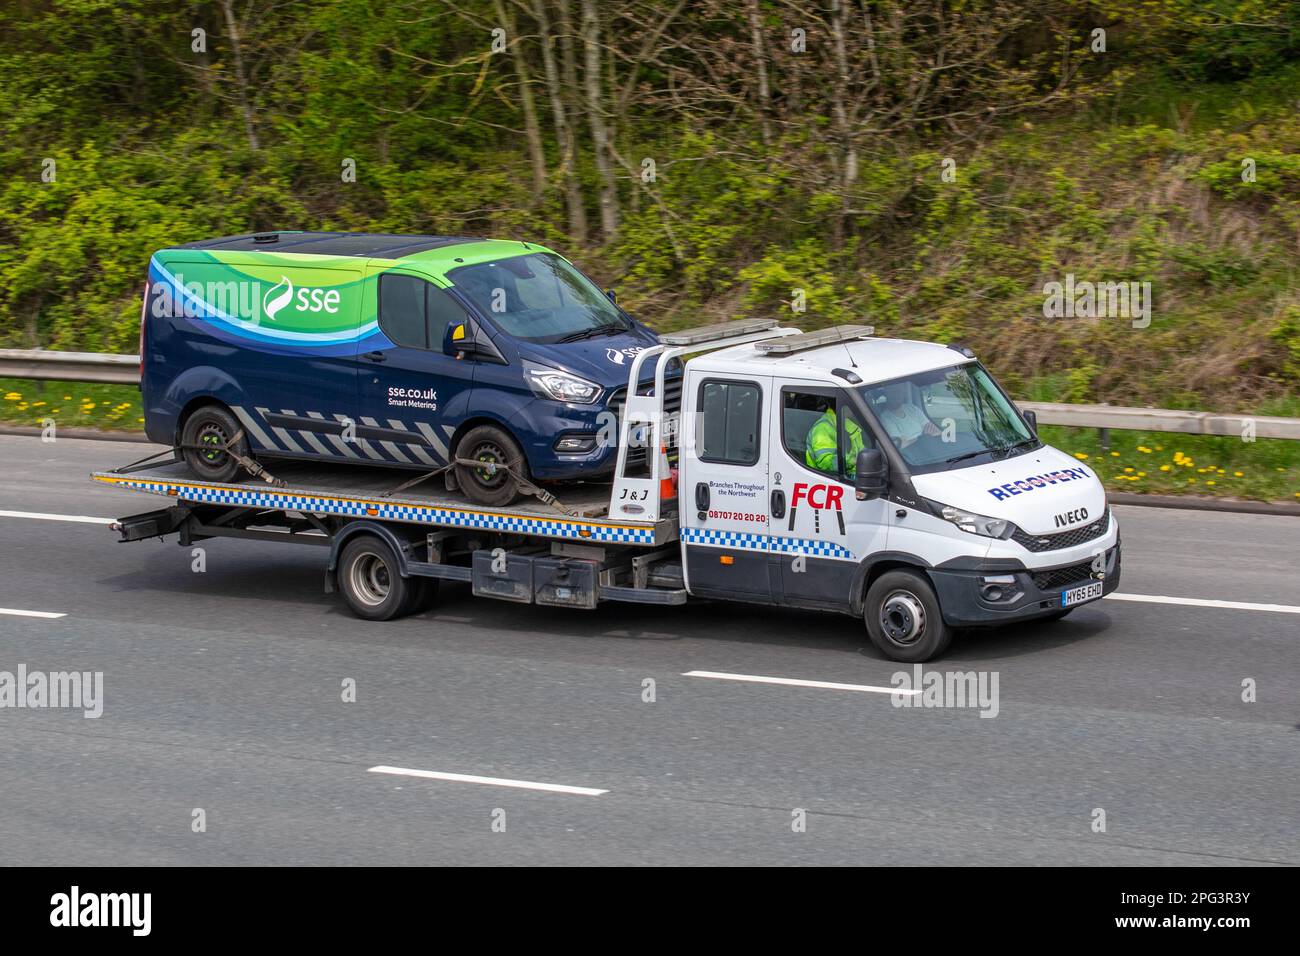 Broken down SSE Smart Metering on IVECO DAILY 70C17 2998 cc Diesel FCR 24HR Roadside RECOVERY TRUCK;  travelling on the m6 motorway, UK Stock Photo